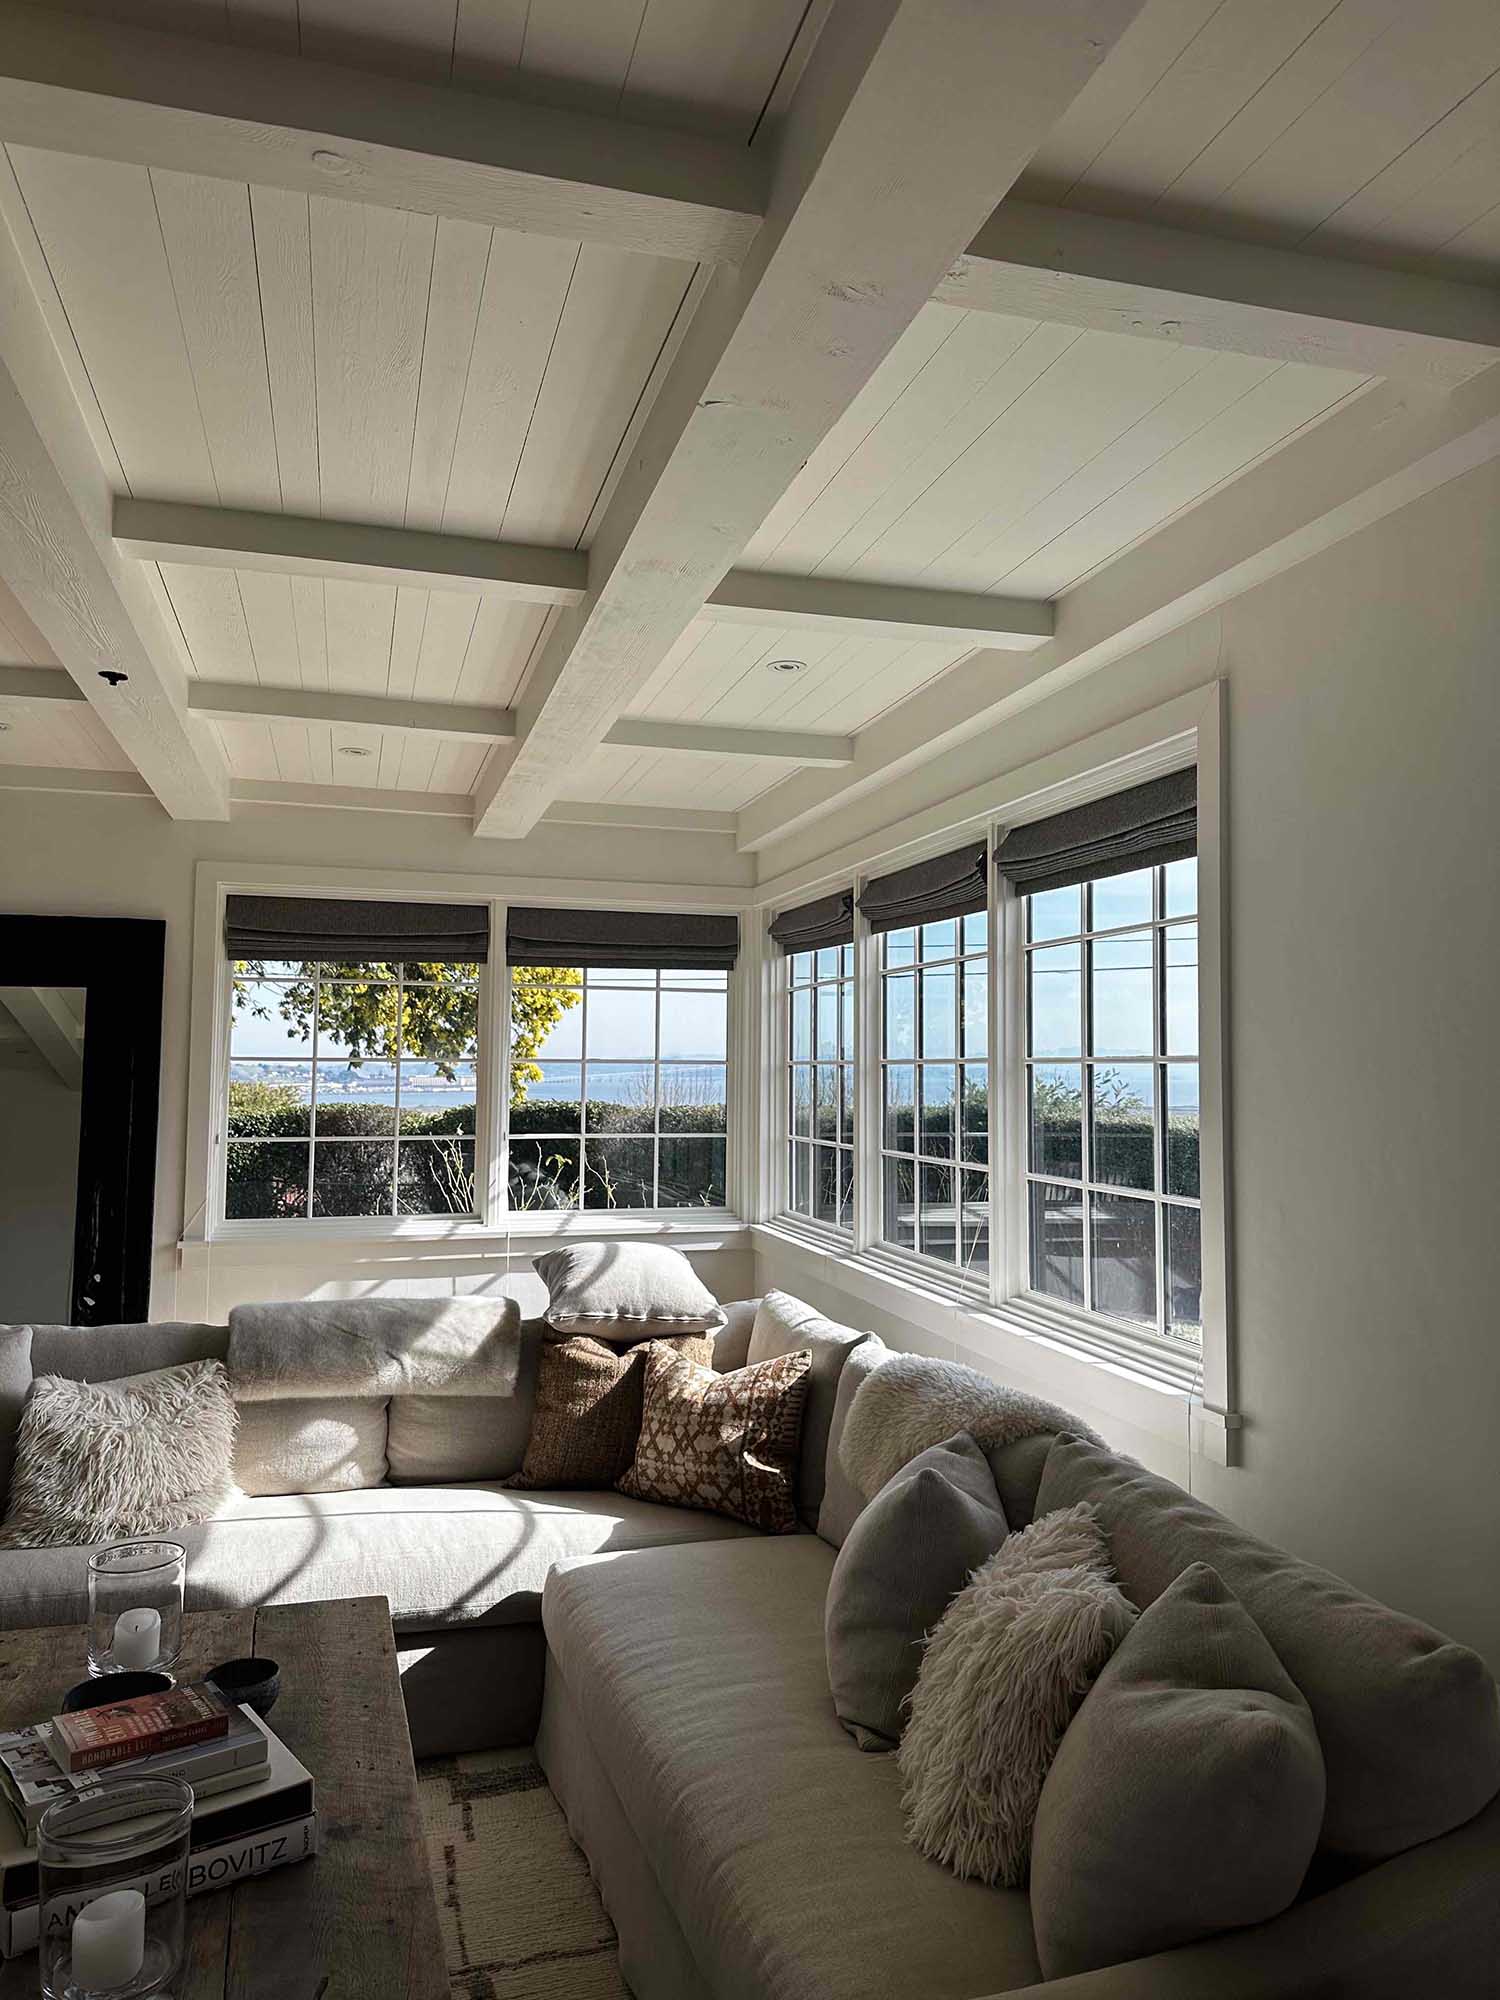 The Best Window Film for Larkspur, CA is the one that works. 3M Prestige Window Film, Installed by ClimatePro